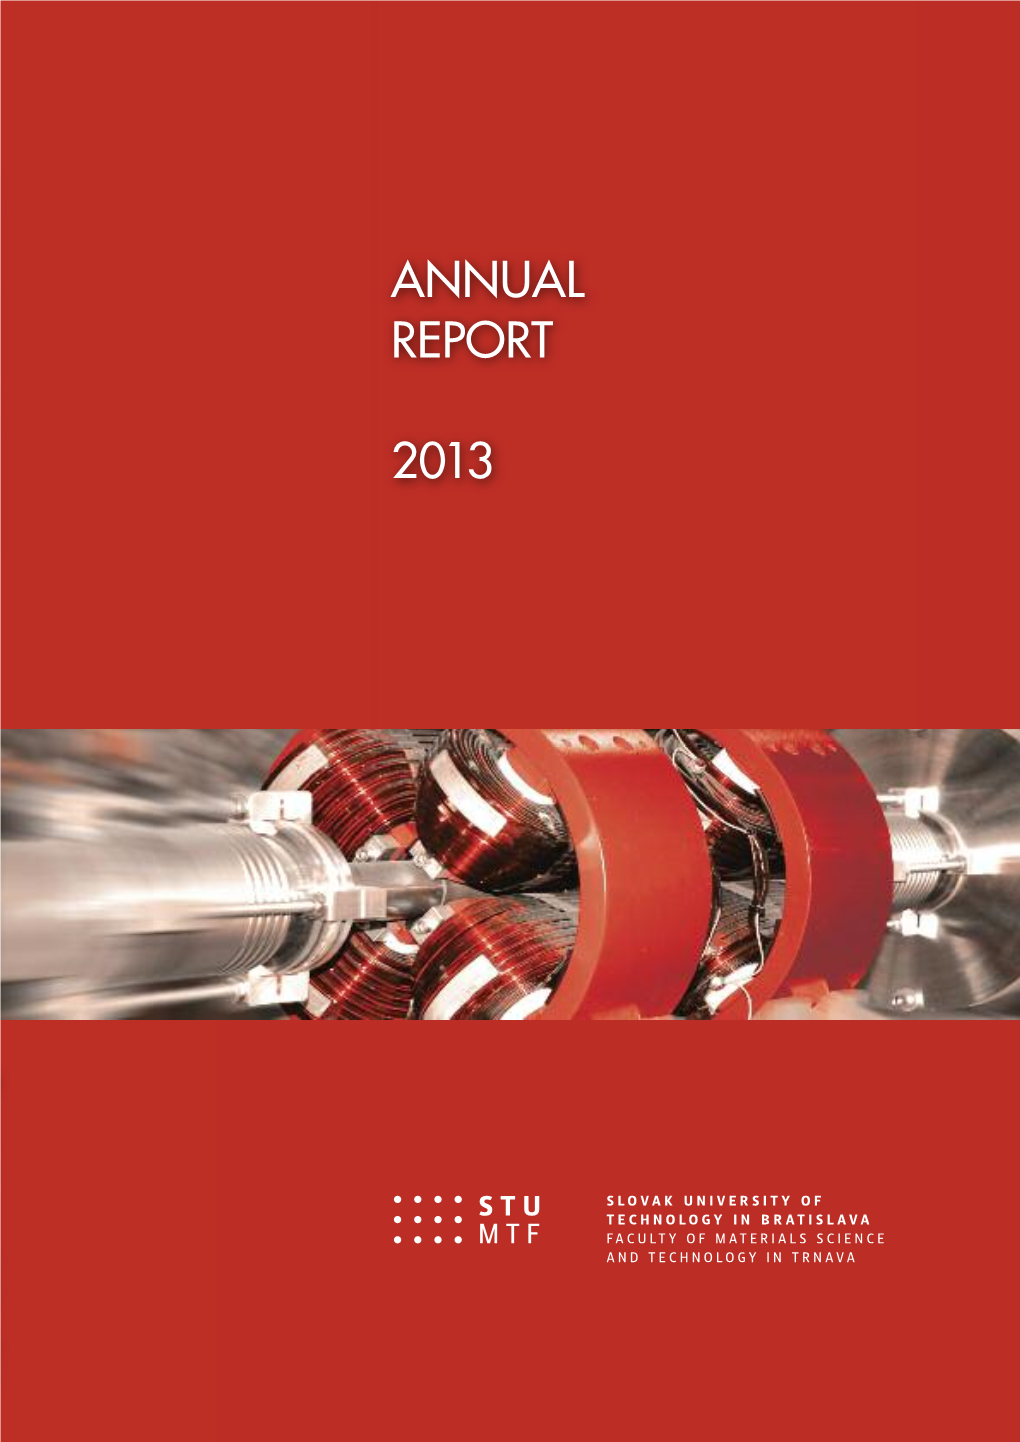 ANNUAL REPORT 2013 SLOVAK UNIVERSITY of TECHNOLOGY in BRATISLAVA 201 RE ANU POR 3 T a L Edited By: Phdr